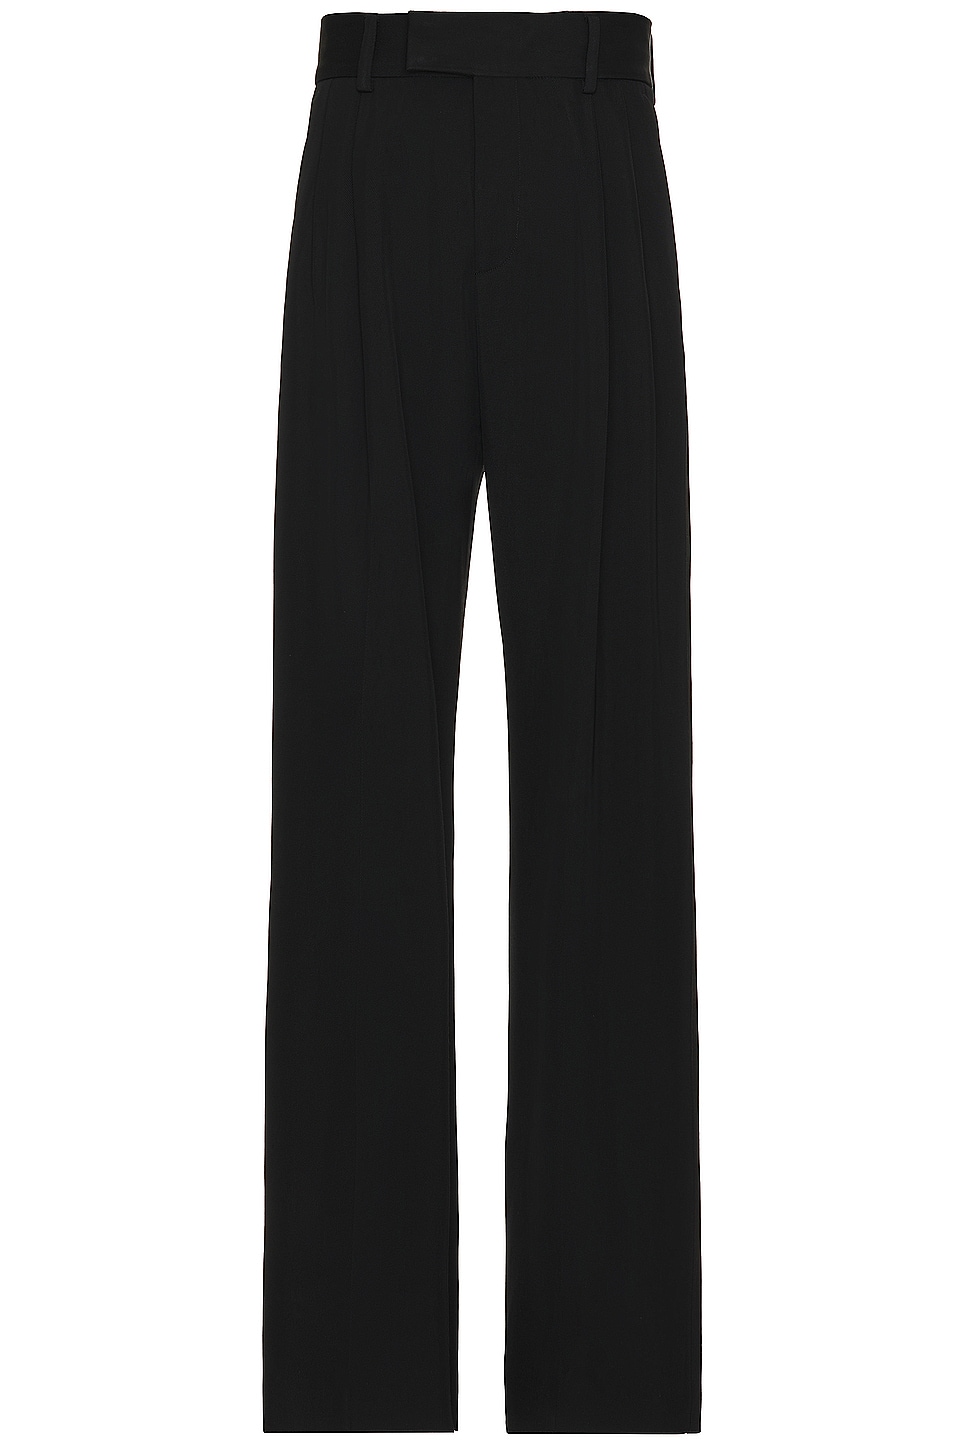 Image 1 of Amiri Double Pleated Pant in Stretch Limo